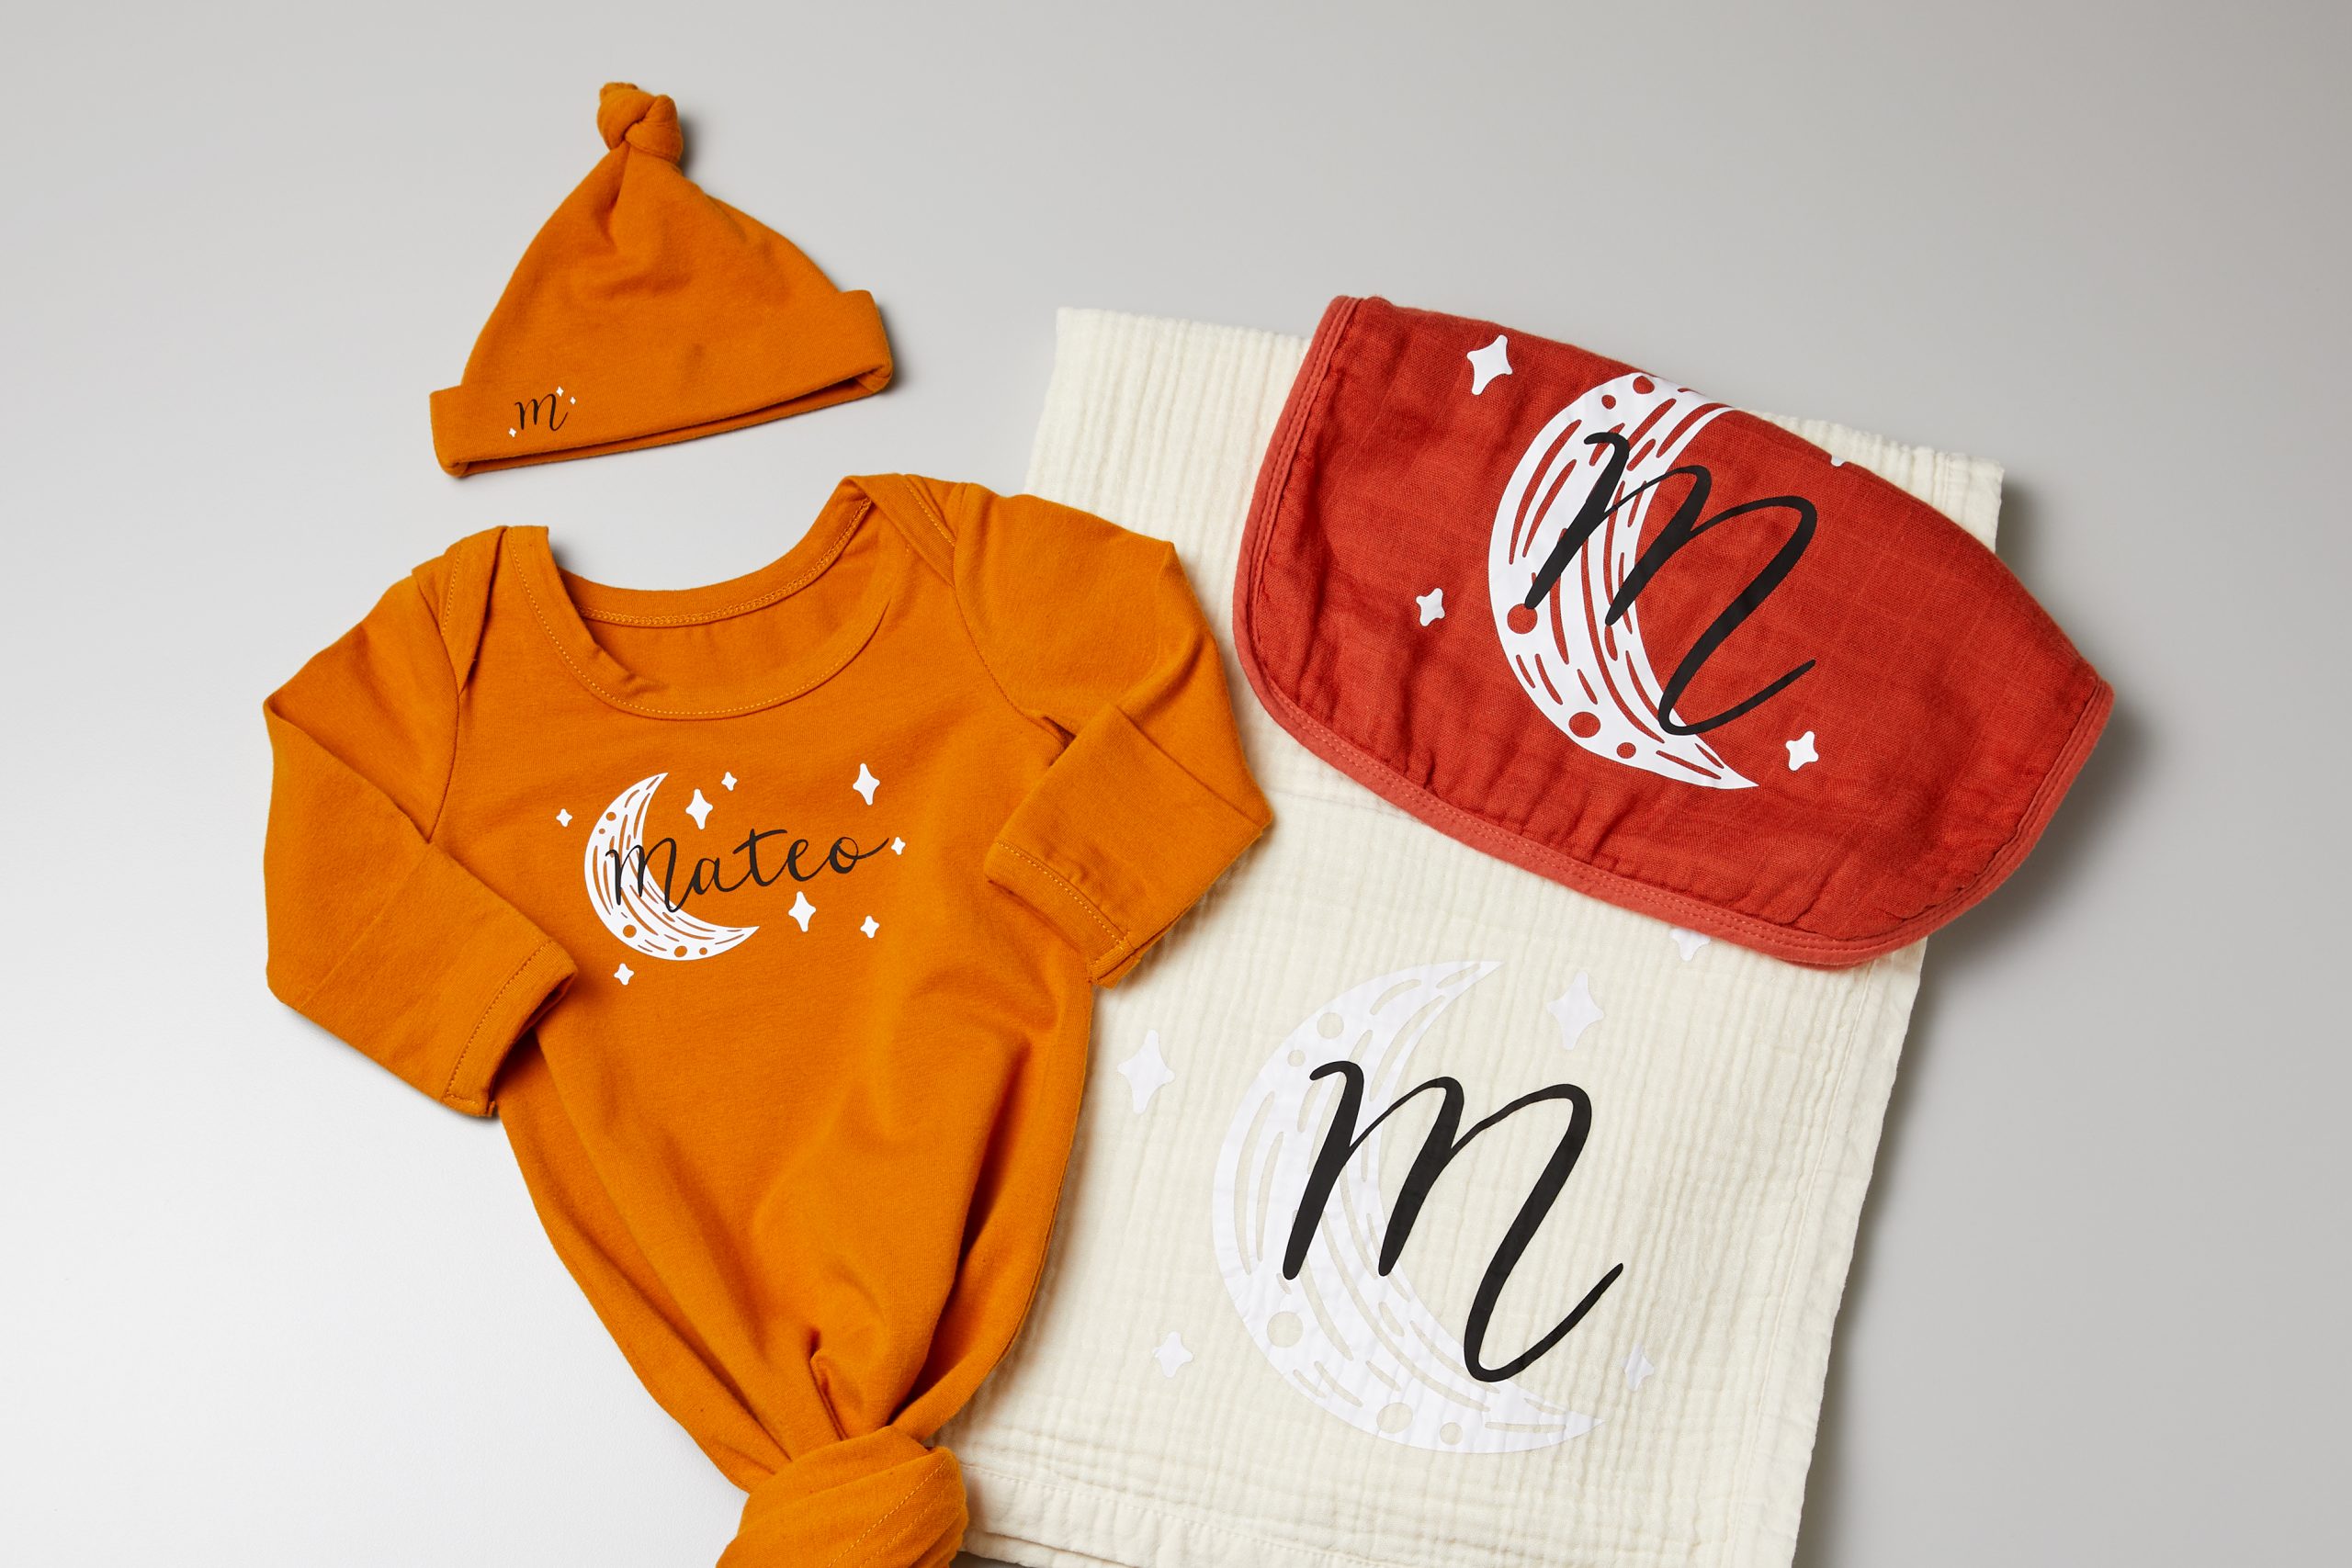 Personalised Baby Clothing Cricut project